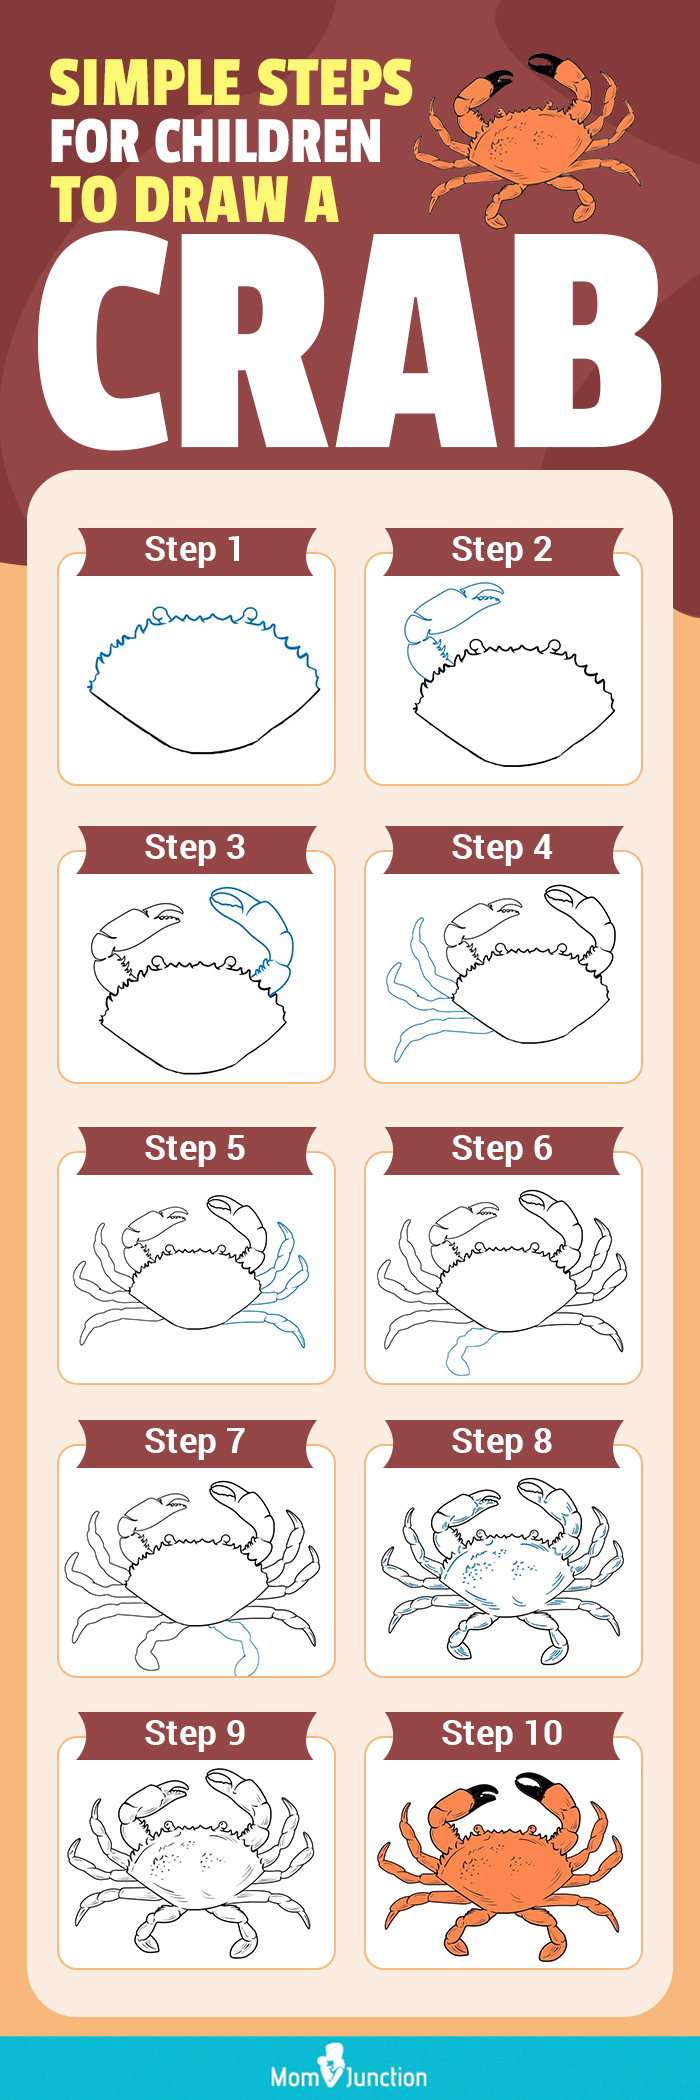 simple steps for children to draw a crab (infographic)